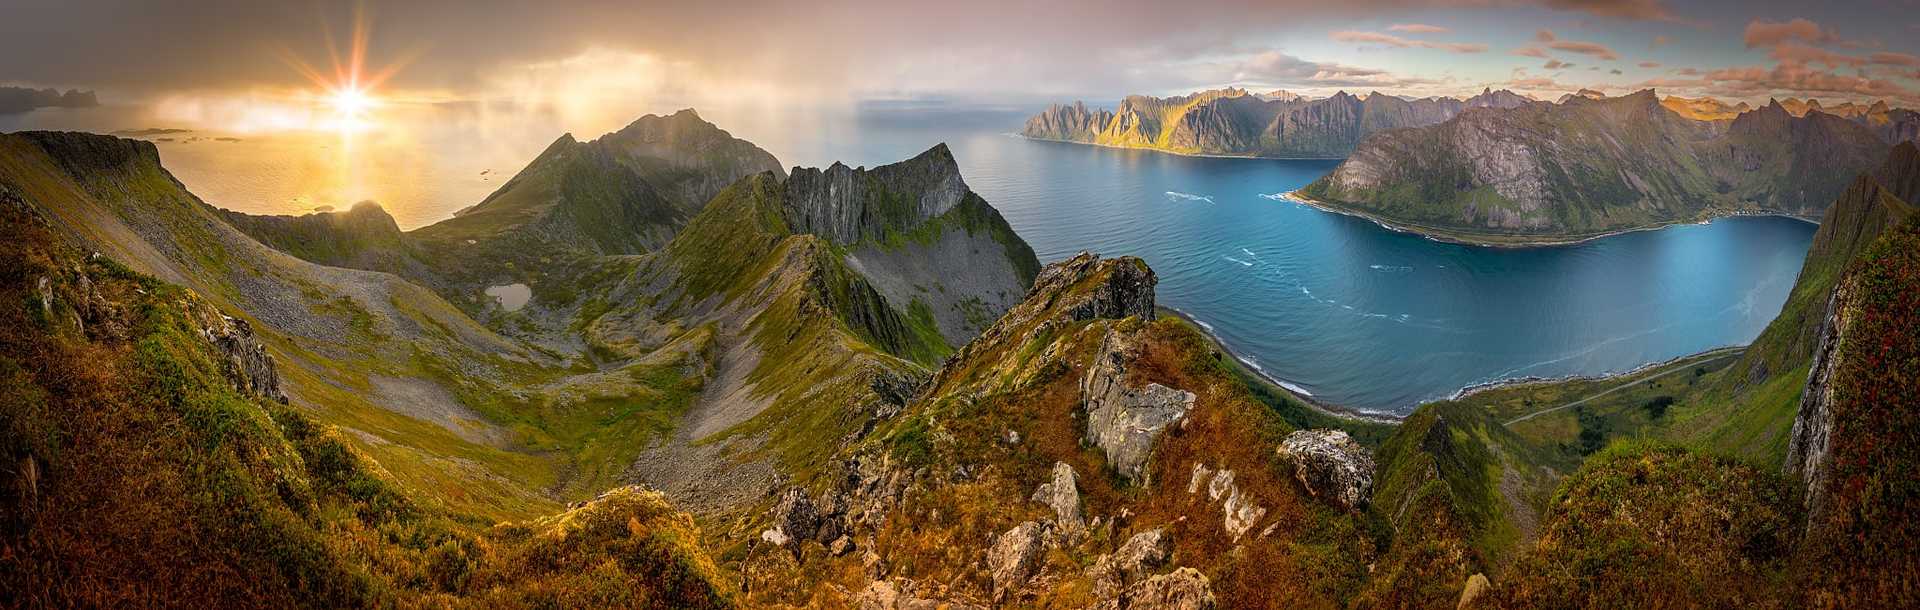 Panoramic View from Husfjellet Mountain on Senja Island during autumn sunset in Norway.